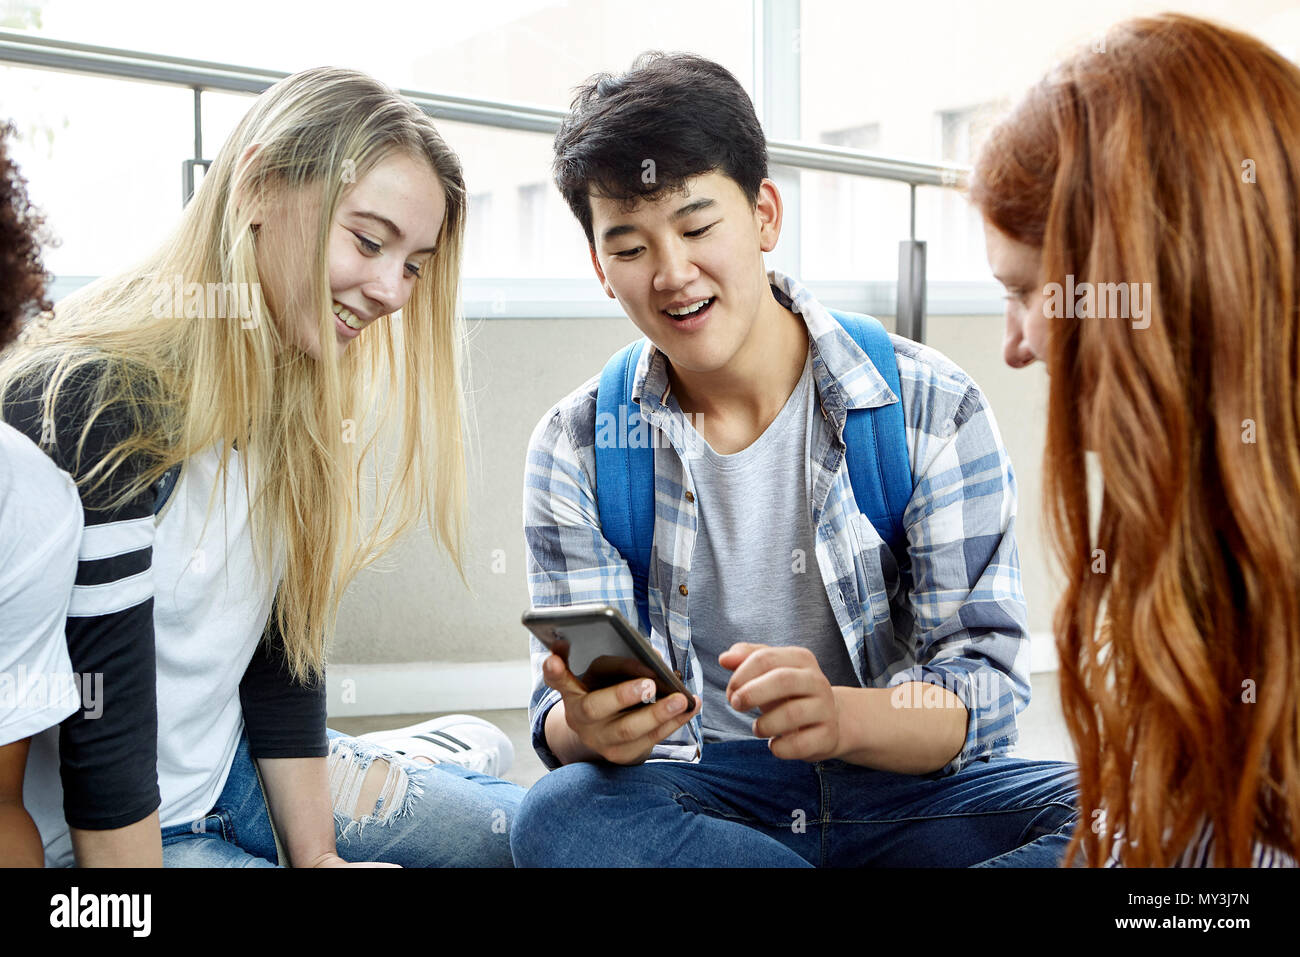 Student showing smart phone to classmates Stock Photo